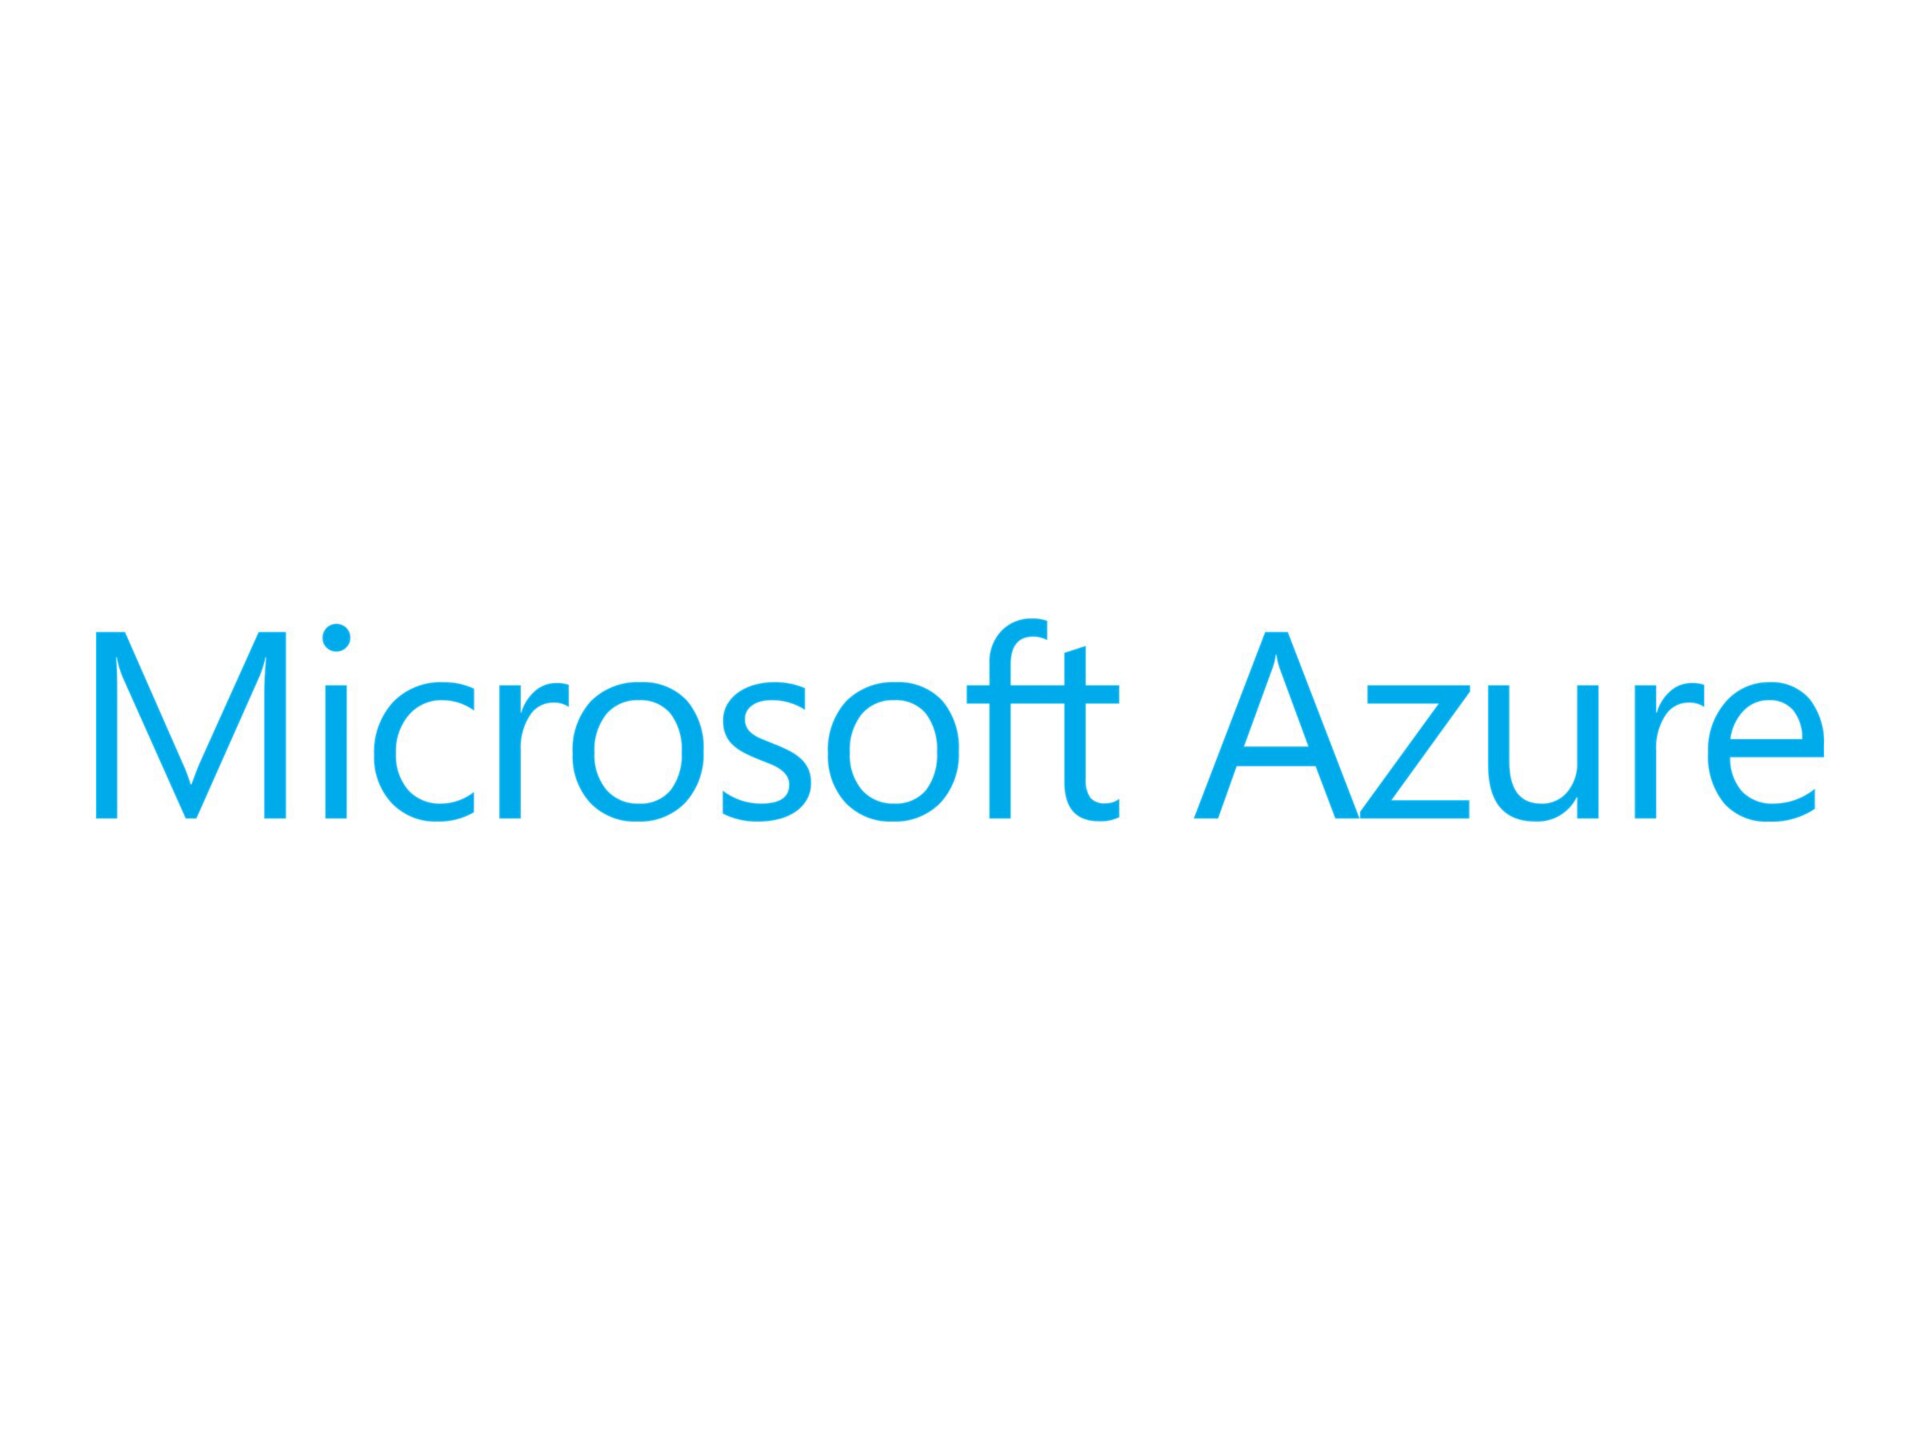 Microsoft Azure Monitor - fee - 400 GB capacity reservation per day